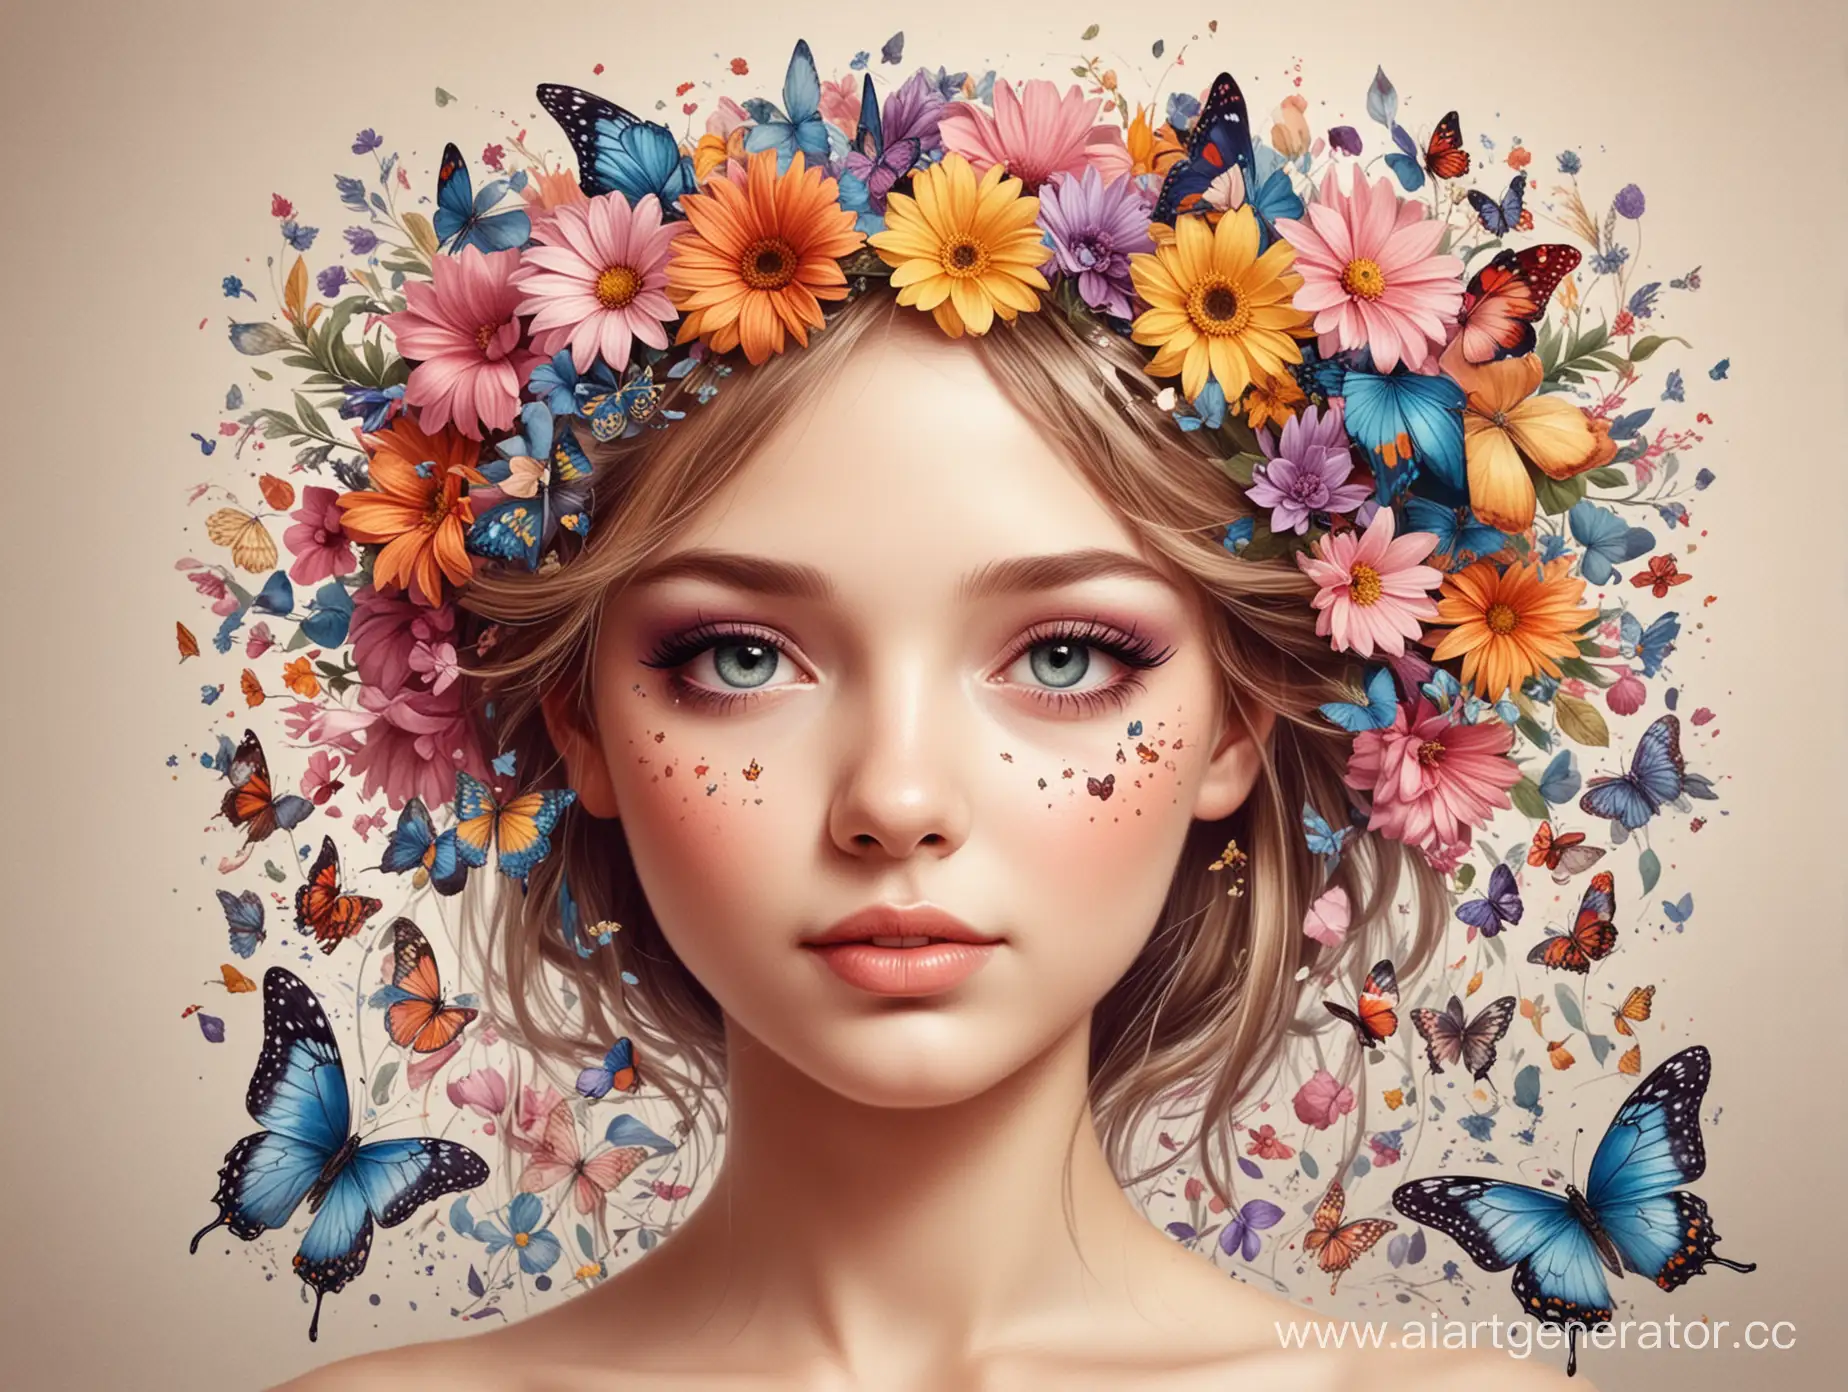 Young-Girl-Creating-Floral-Art-on-Her-Face-with-Butterflies